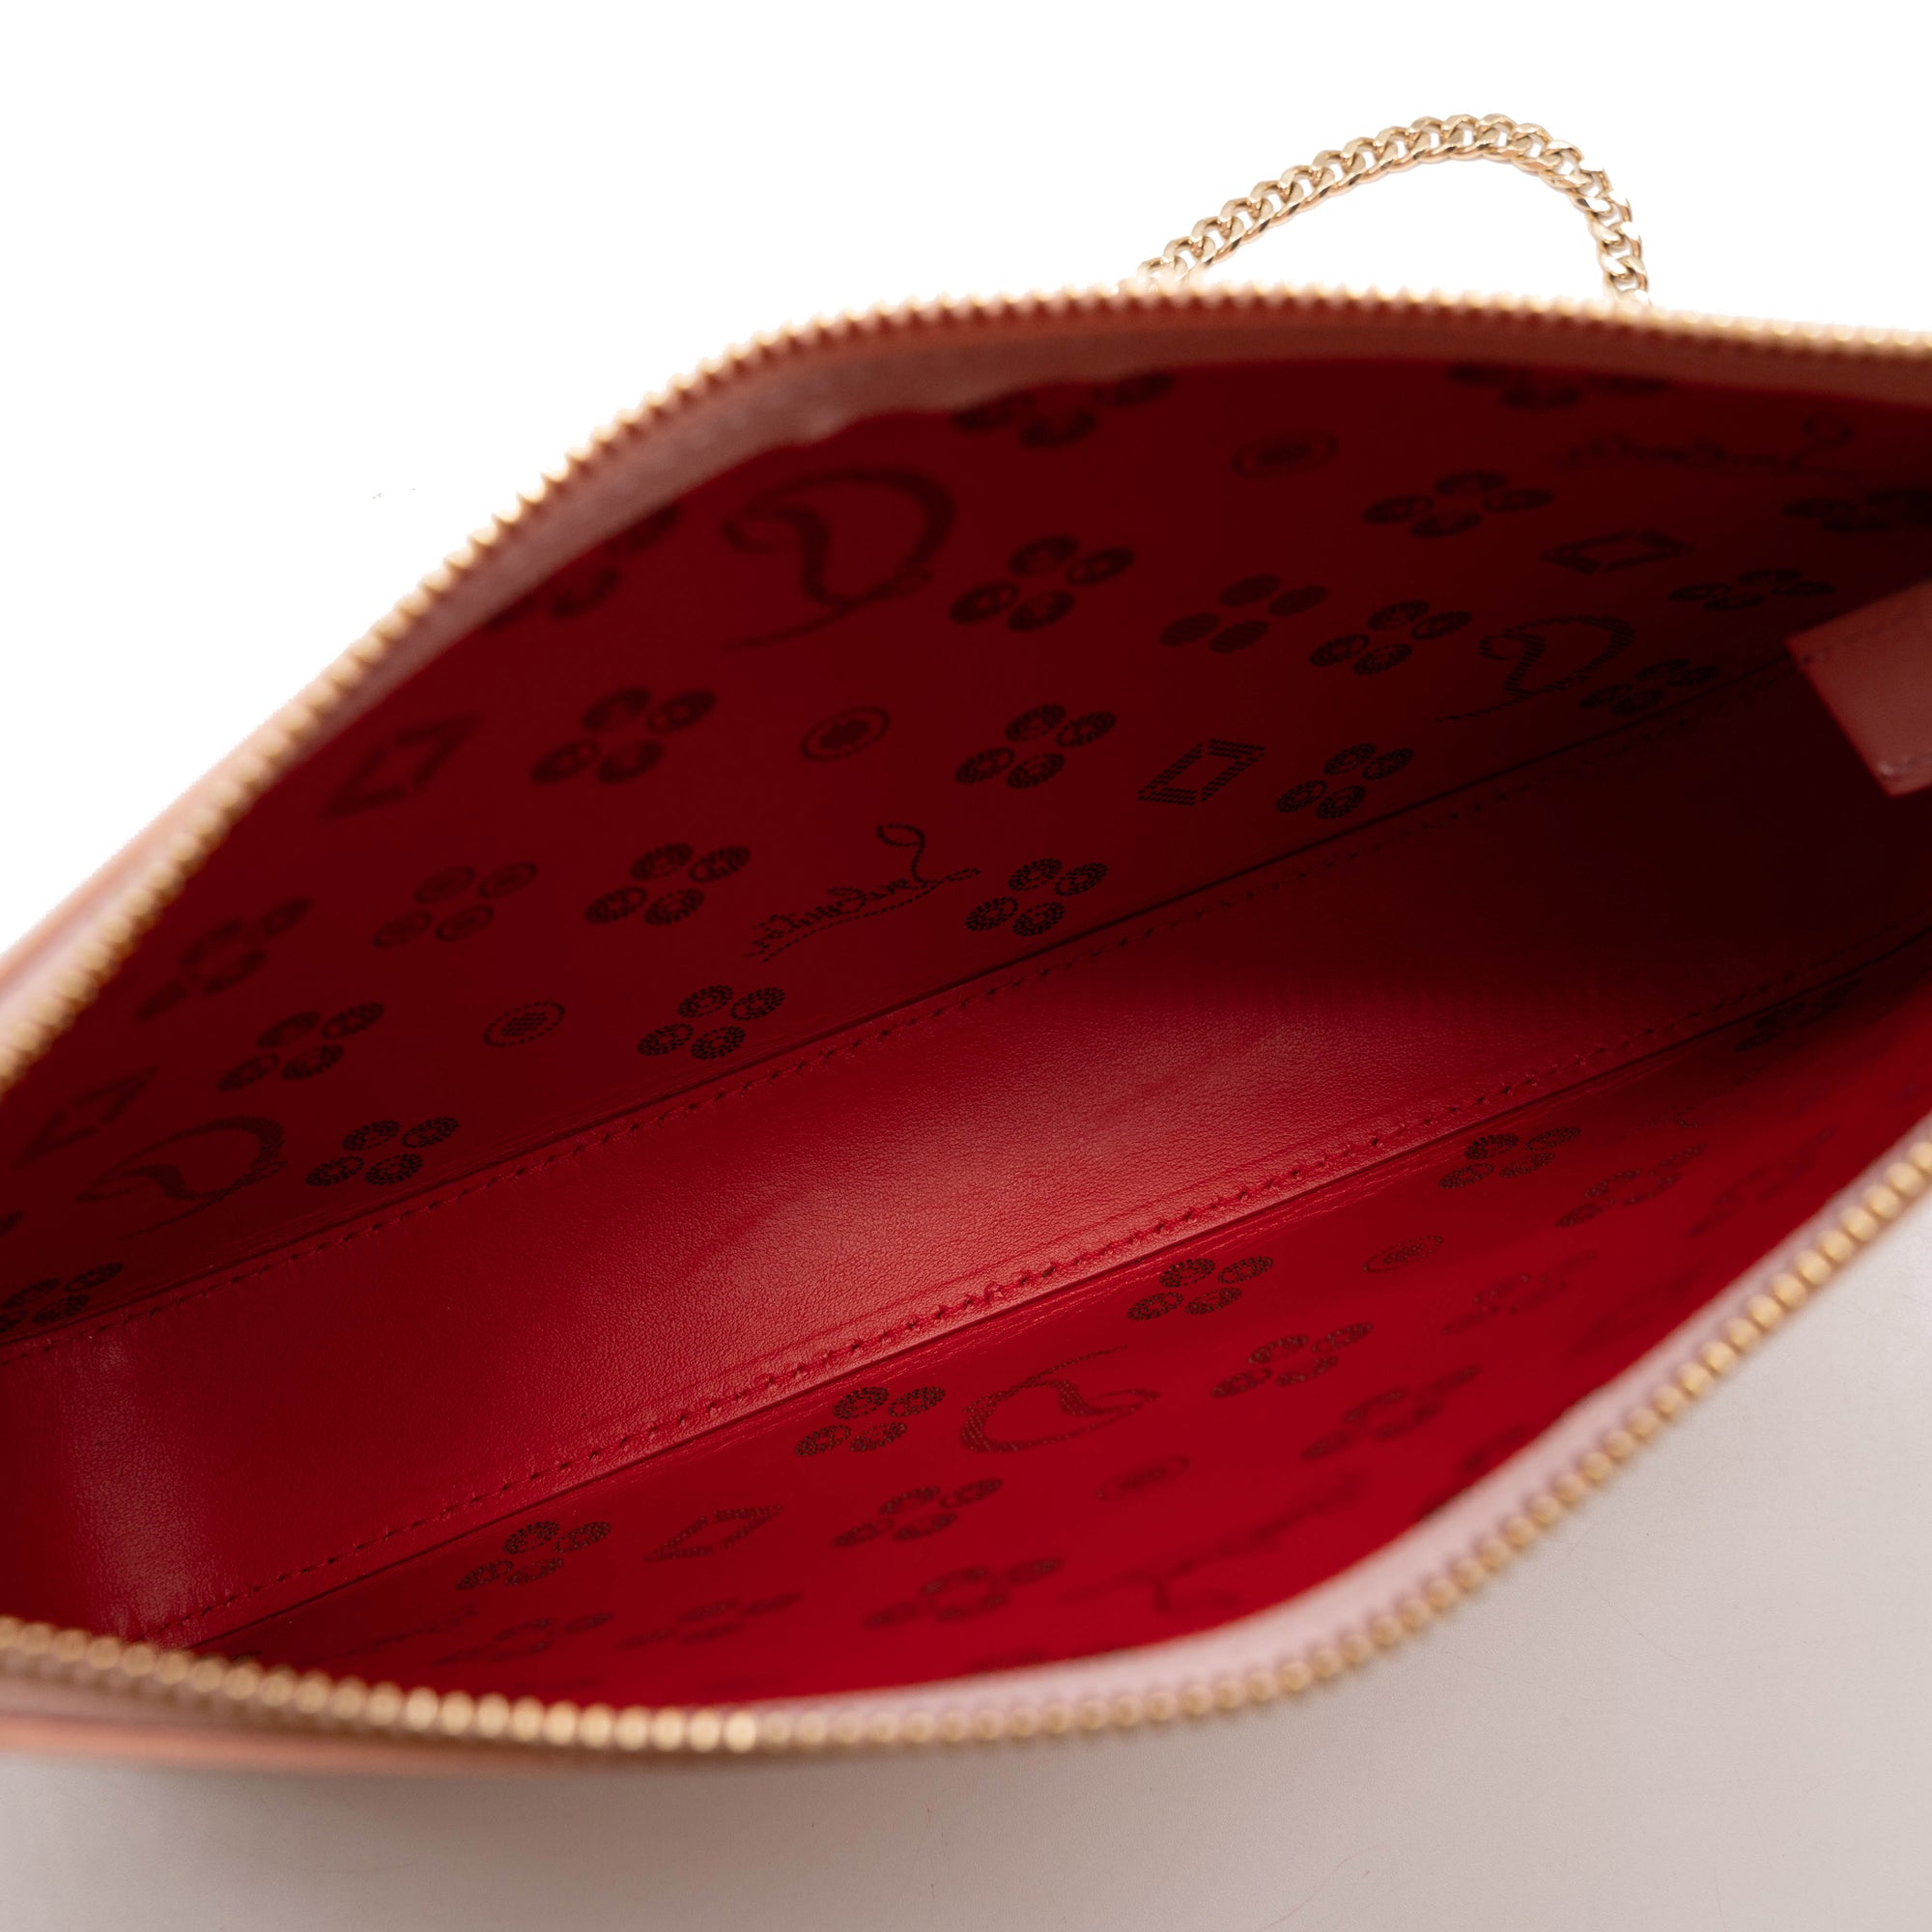 Loubila Perforated Leather Clutch in Purple - Christian Louboutin